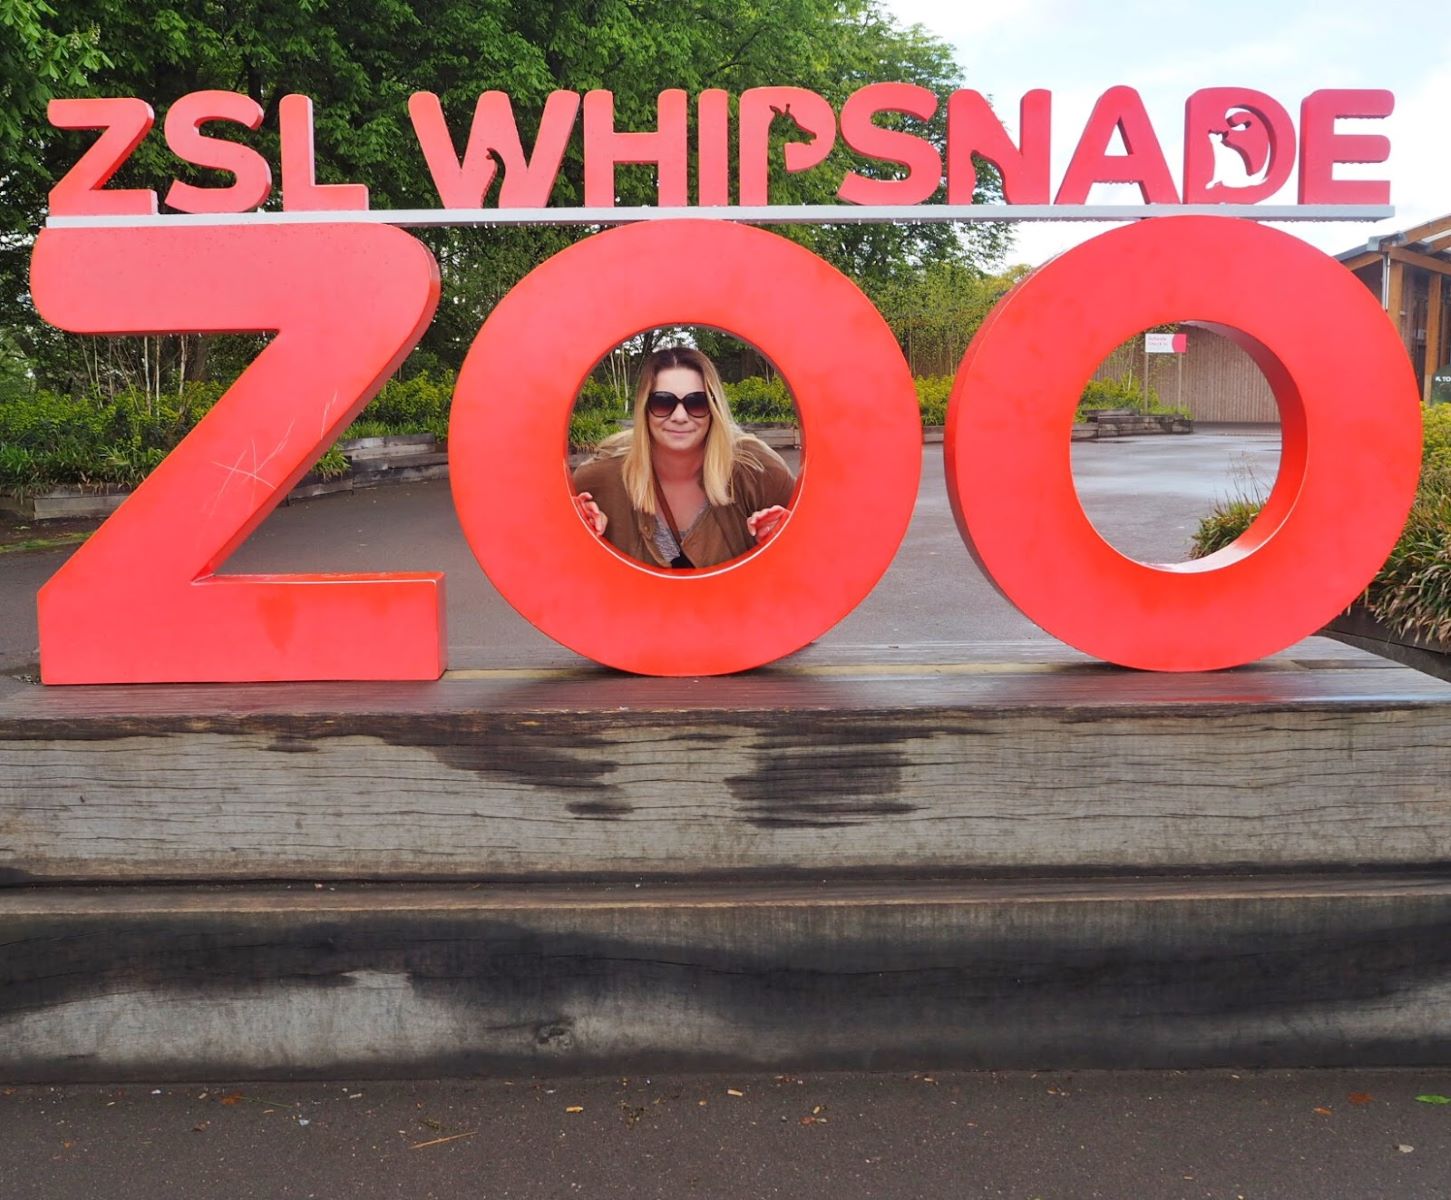 16-extraordinary-facts-about-zsl-whipsnade-zoo